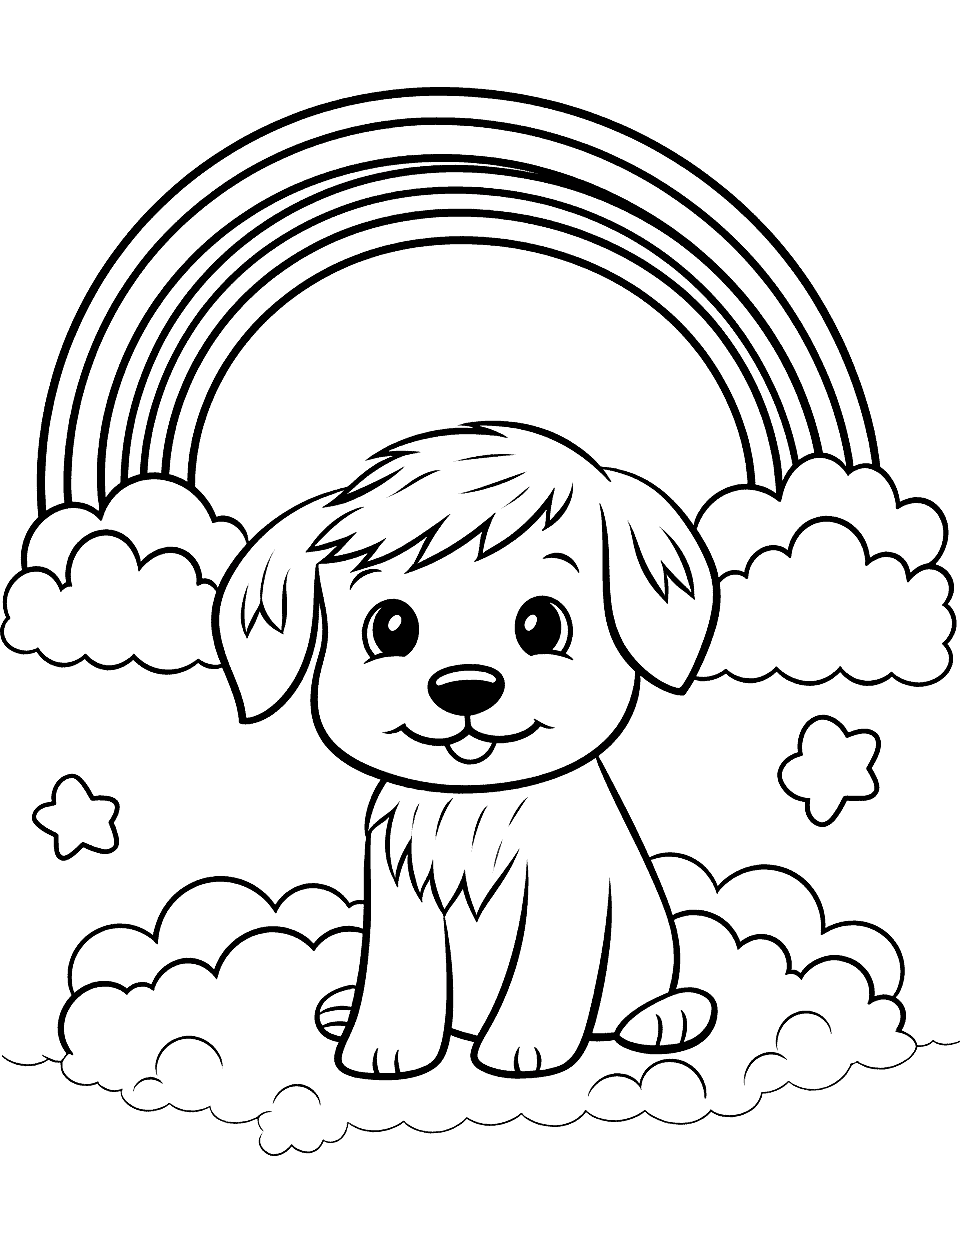 Cute Dog and Rainbow Coloring Page - A lovable dog chasing a rainbow, perfect for pet lovers.